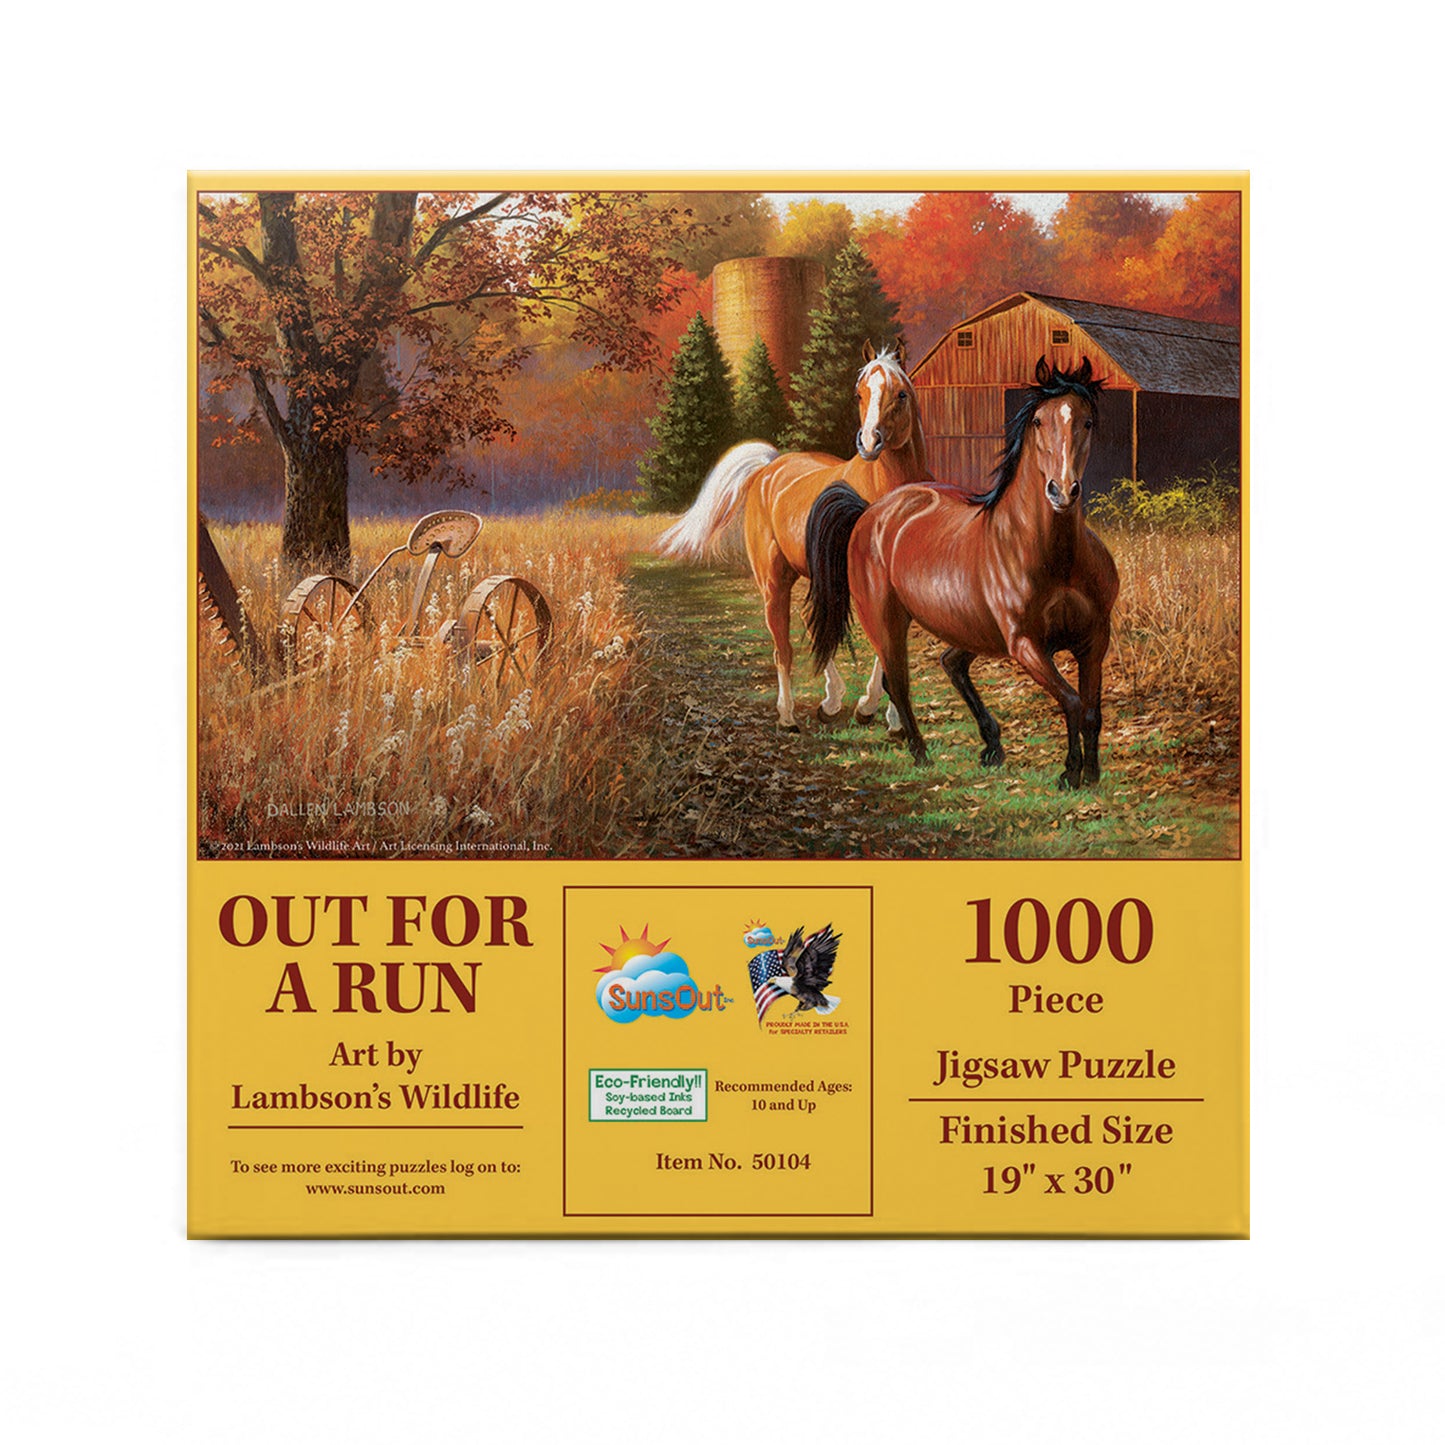 Out for a Run - 1000 Piece Jigsaw Puzzle